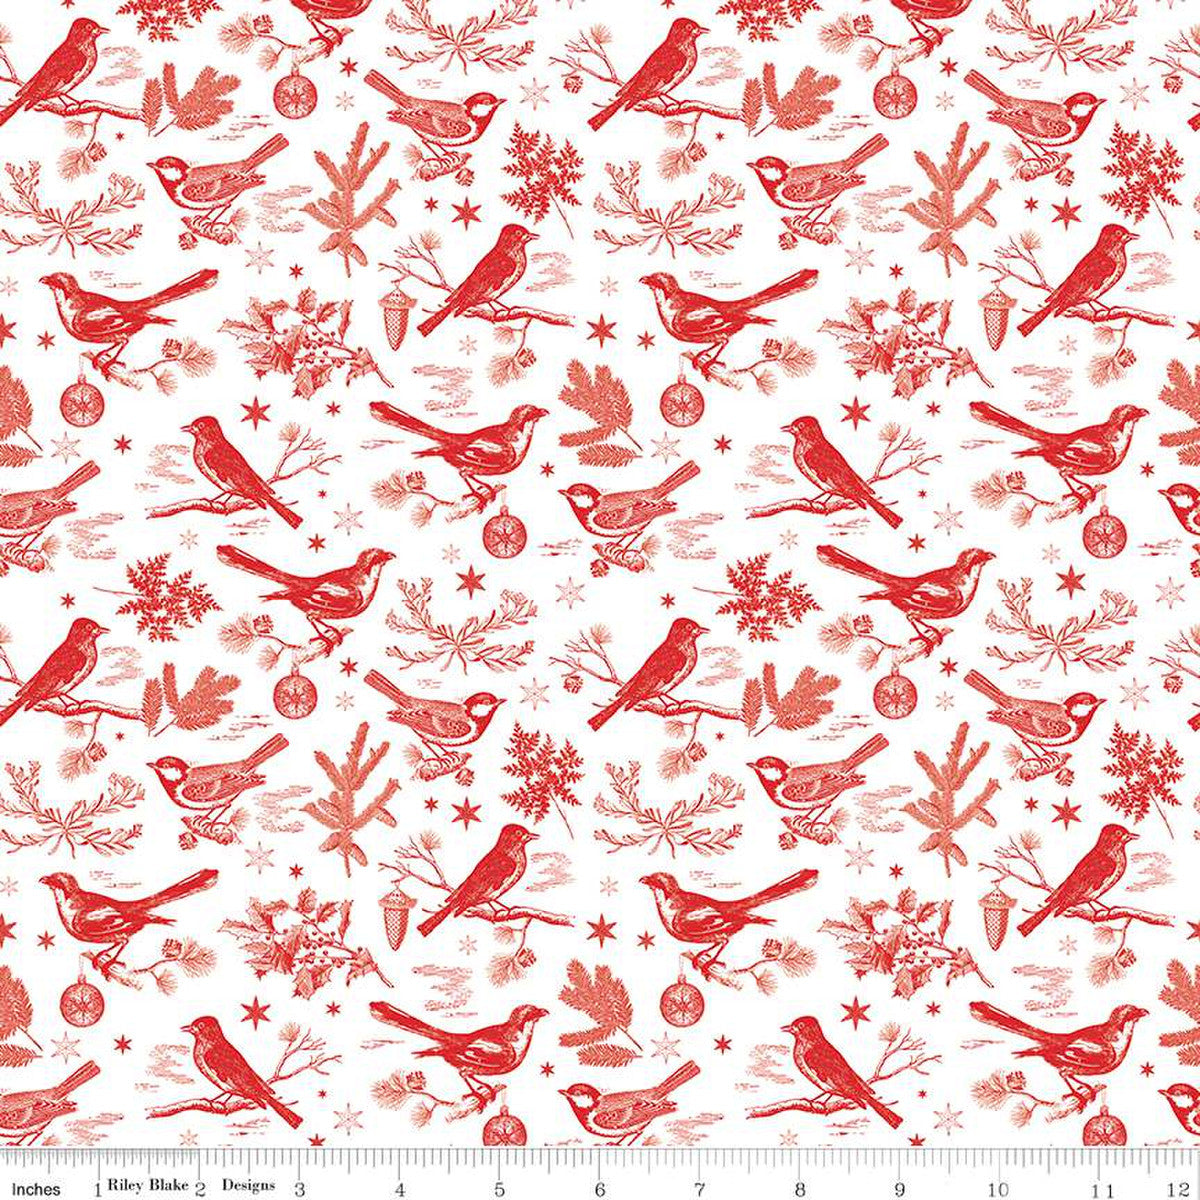 Peace on Earth by My Mind's Eye for Riley Blake Designs is great for quilting, apparel and home decor. This print features birds, sprigs of leaves, ornaments, stars, and more.